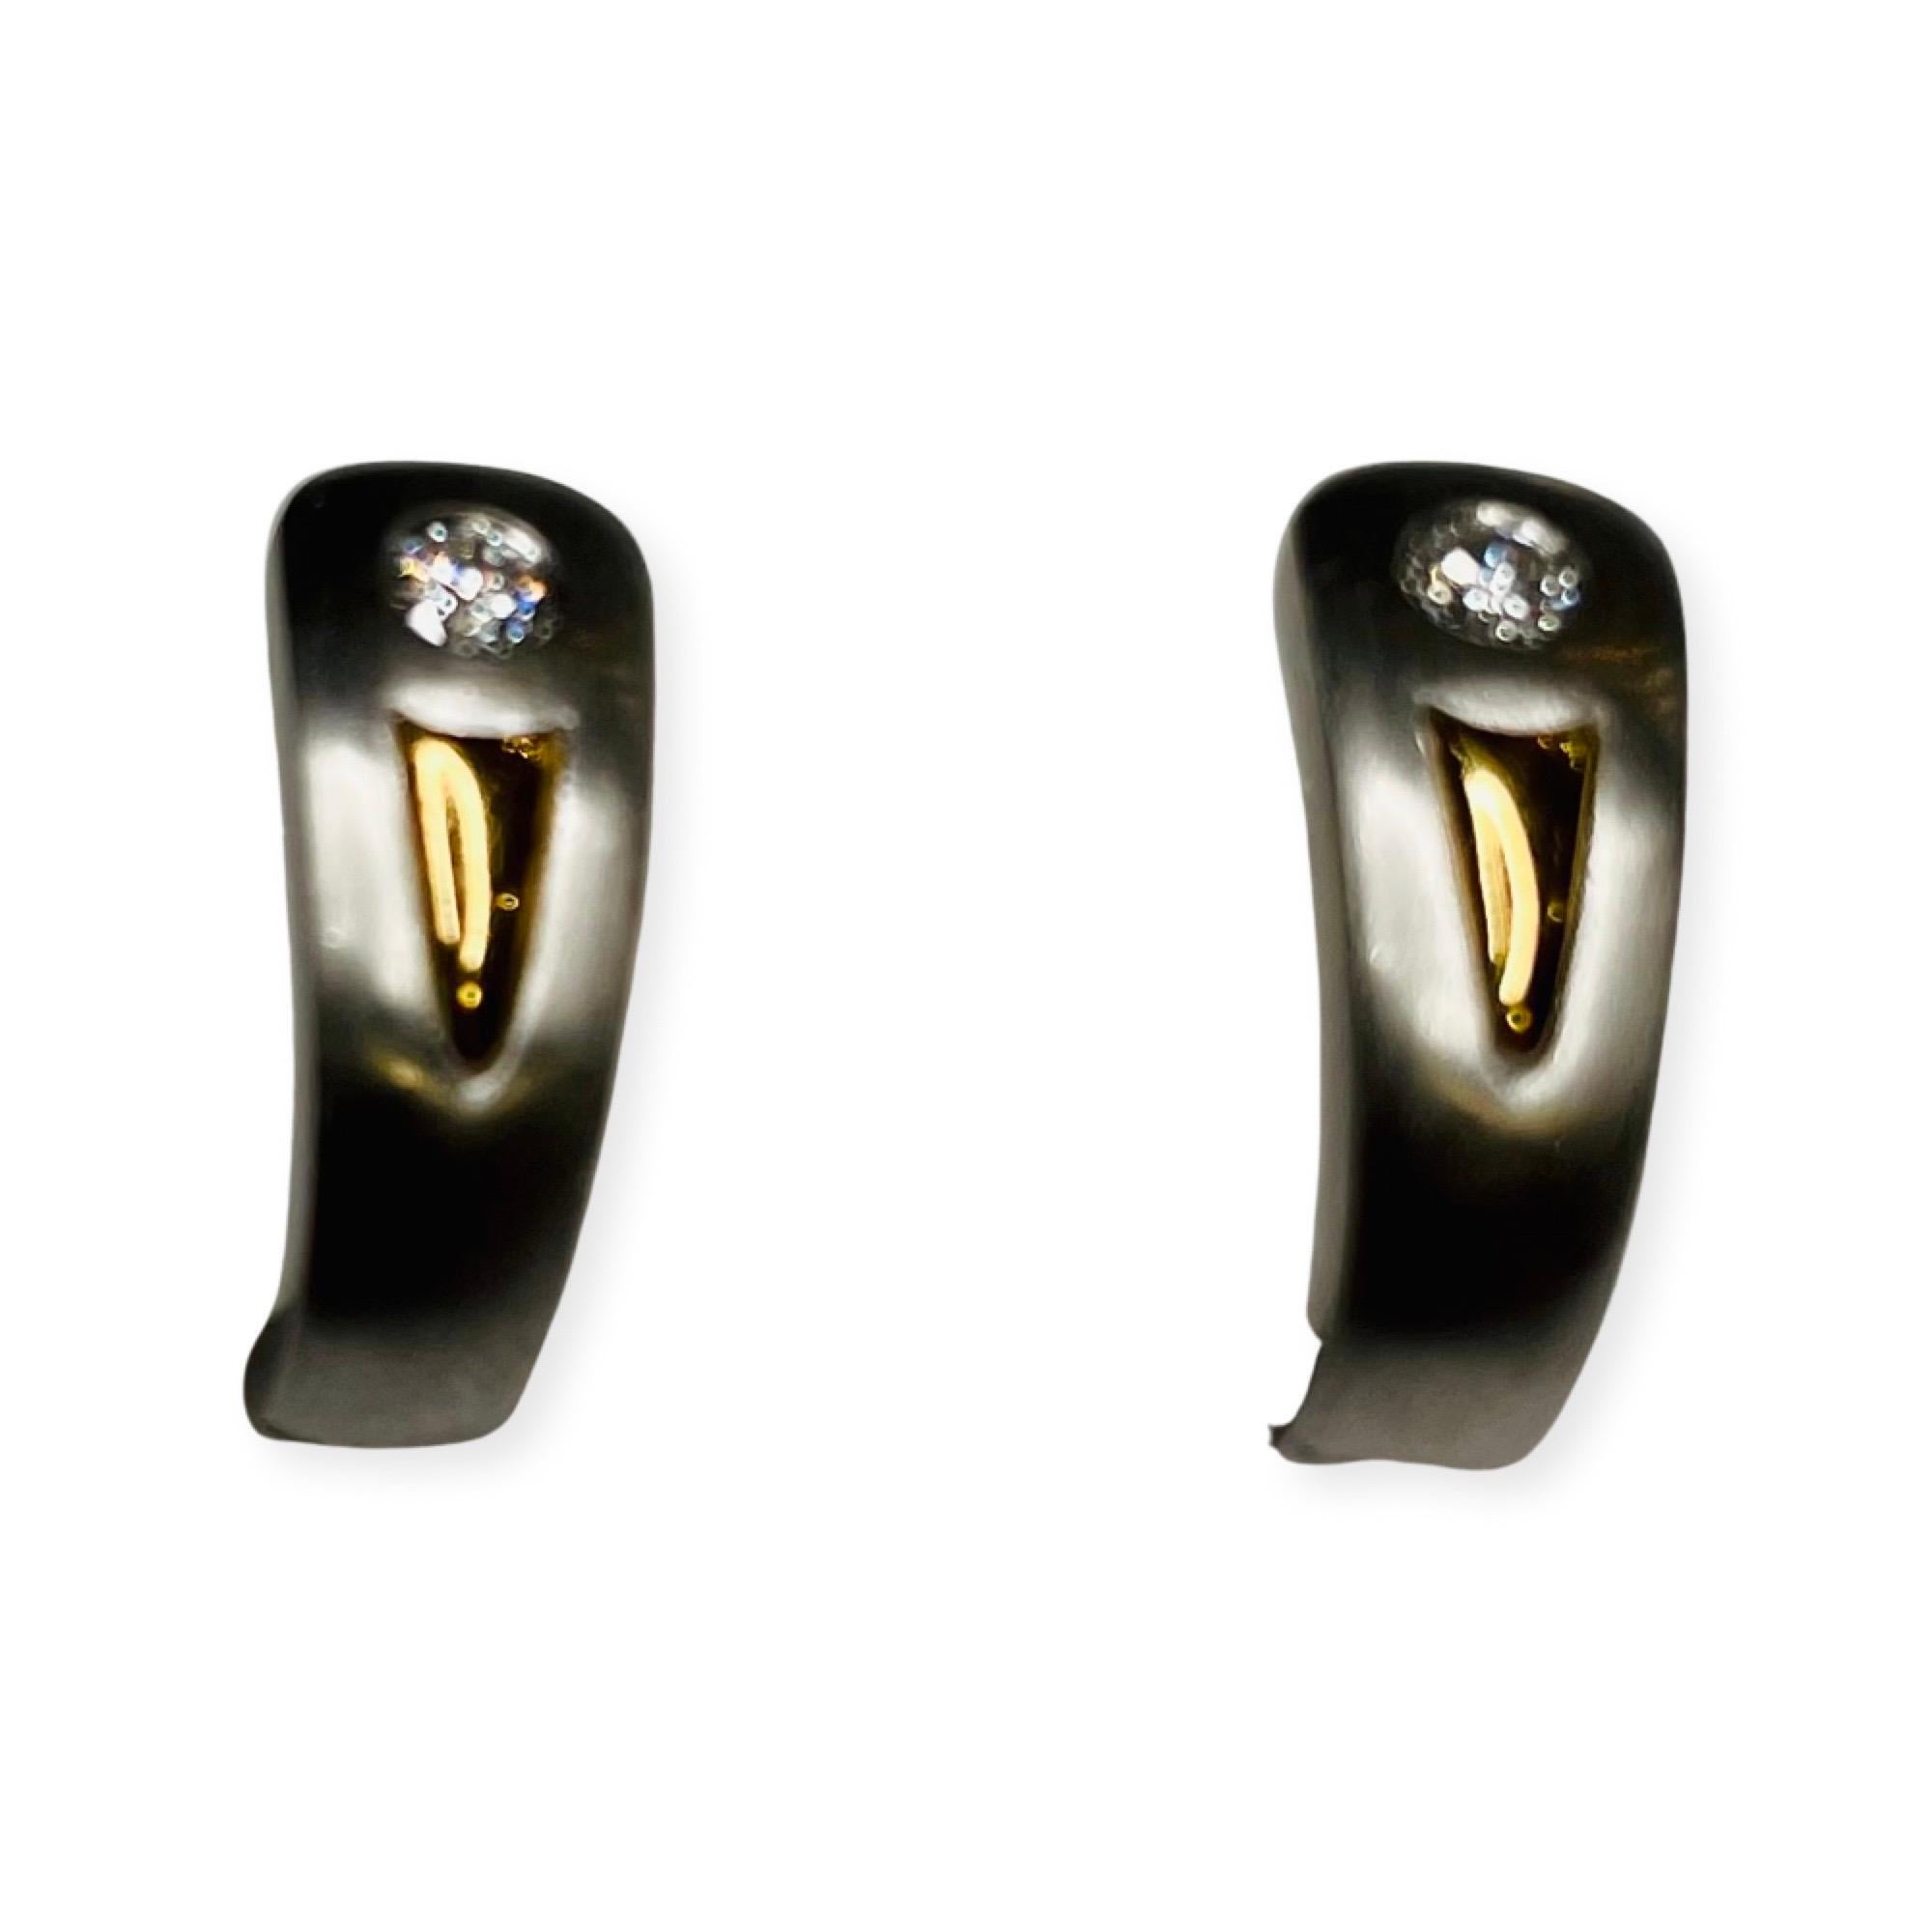 Rudolf Erdel Platinum and 18K Yellow Gold Diamond Earrings.  These are huggie style. The earrings are 15.54 mm by 6.28 mm. The two diamonds have a total weight of 0.16 carats. They are full cut round brilliant diamond of VS clarity and G color. They